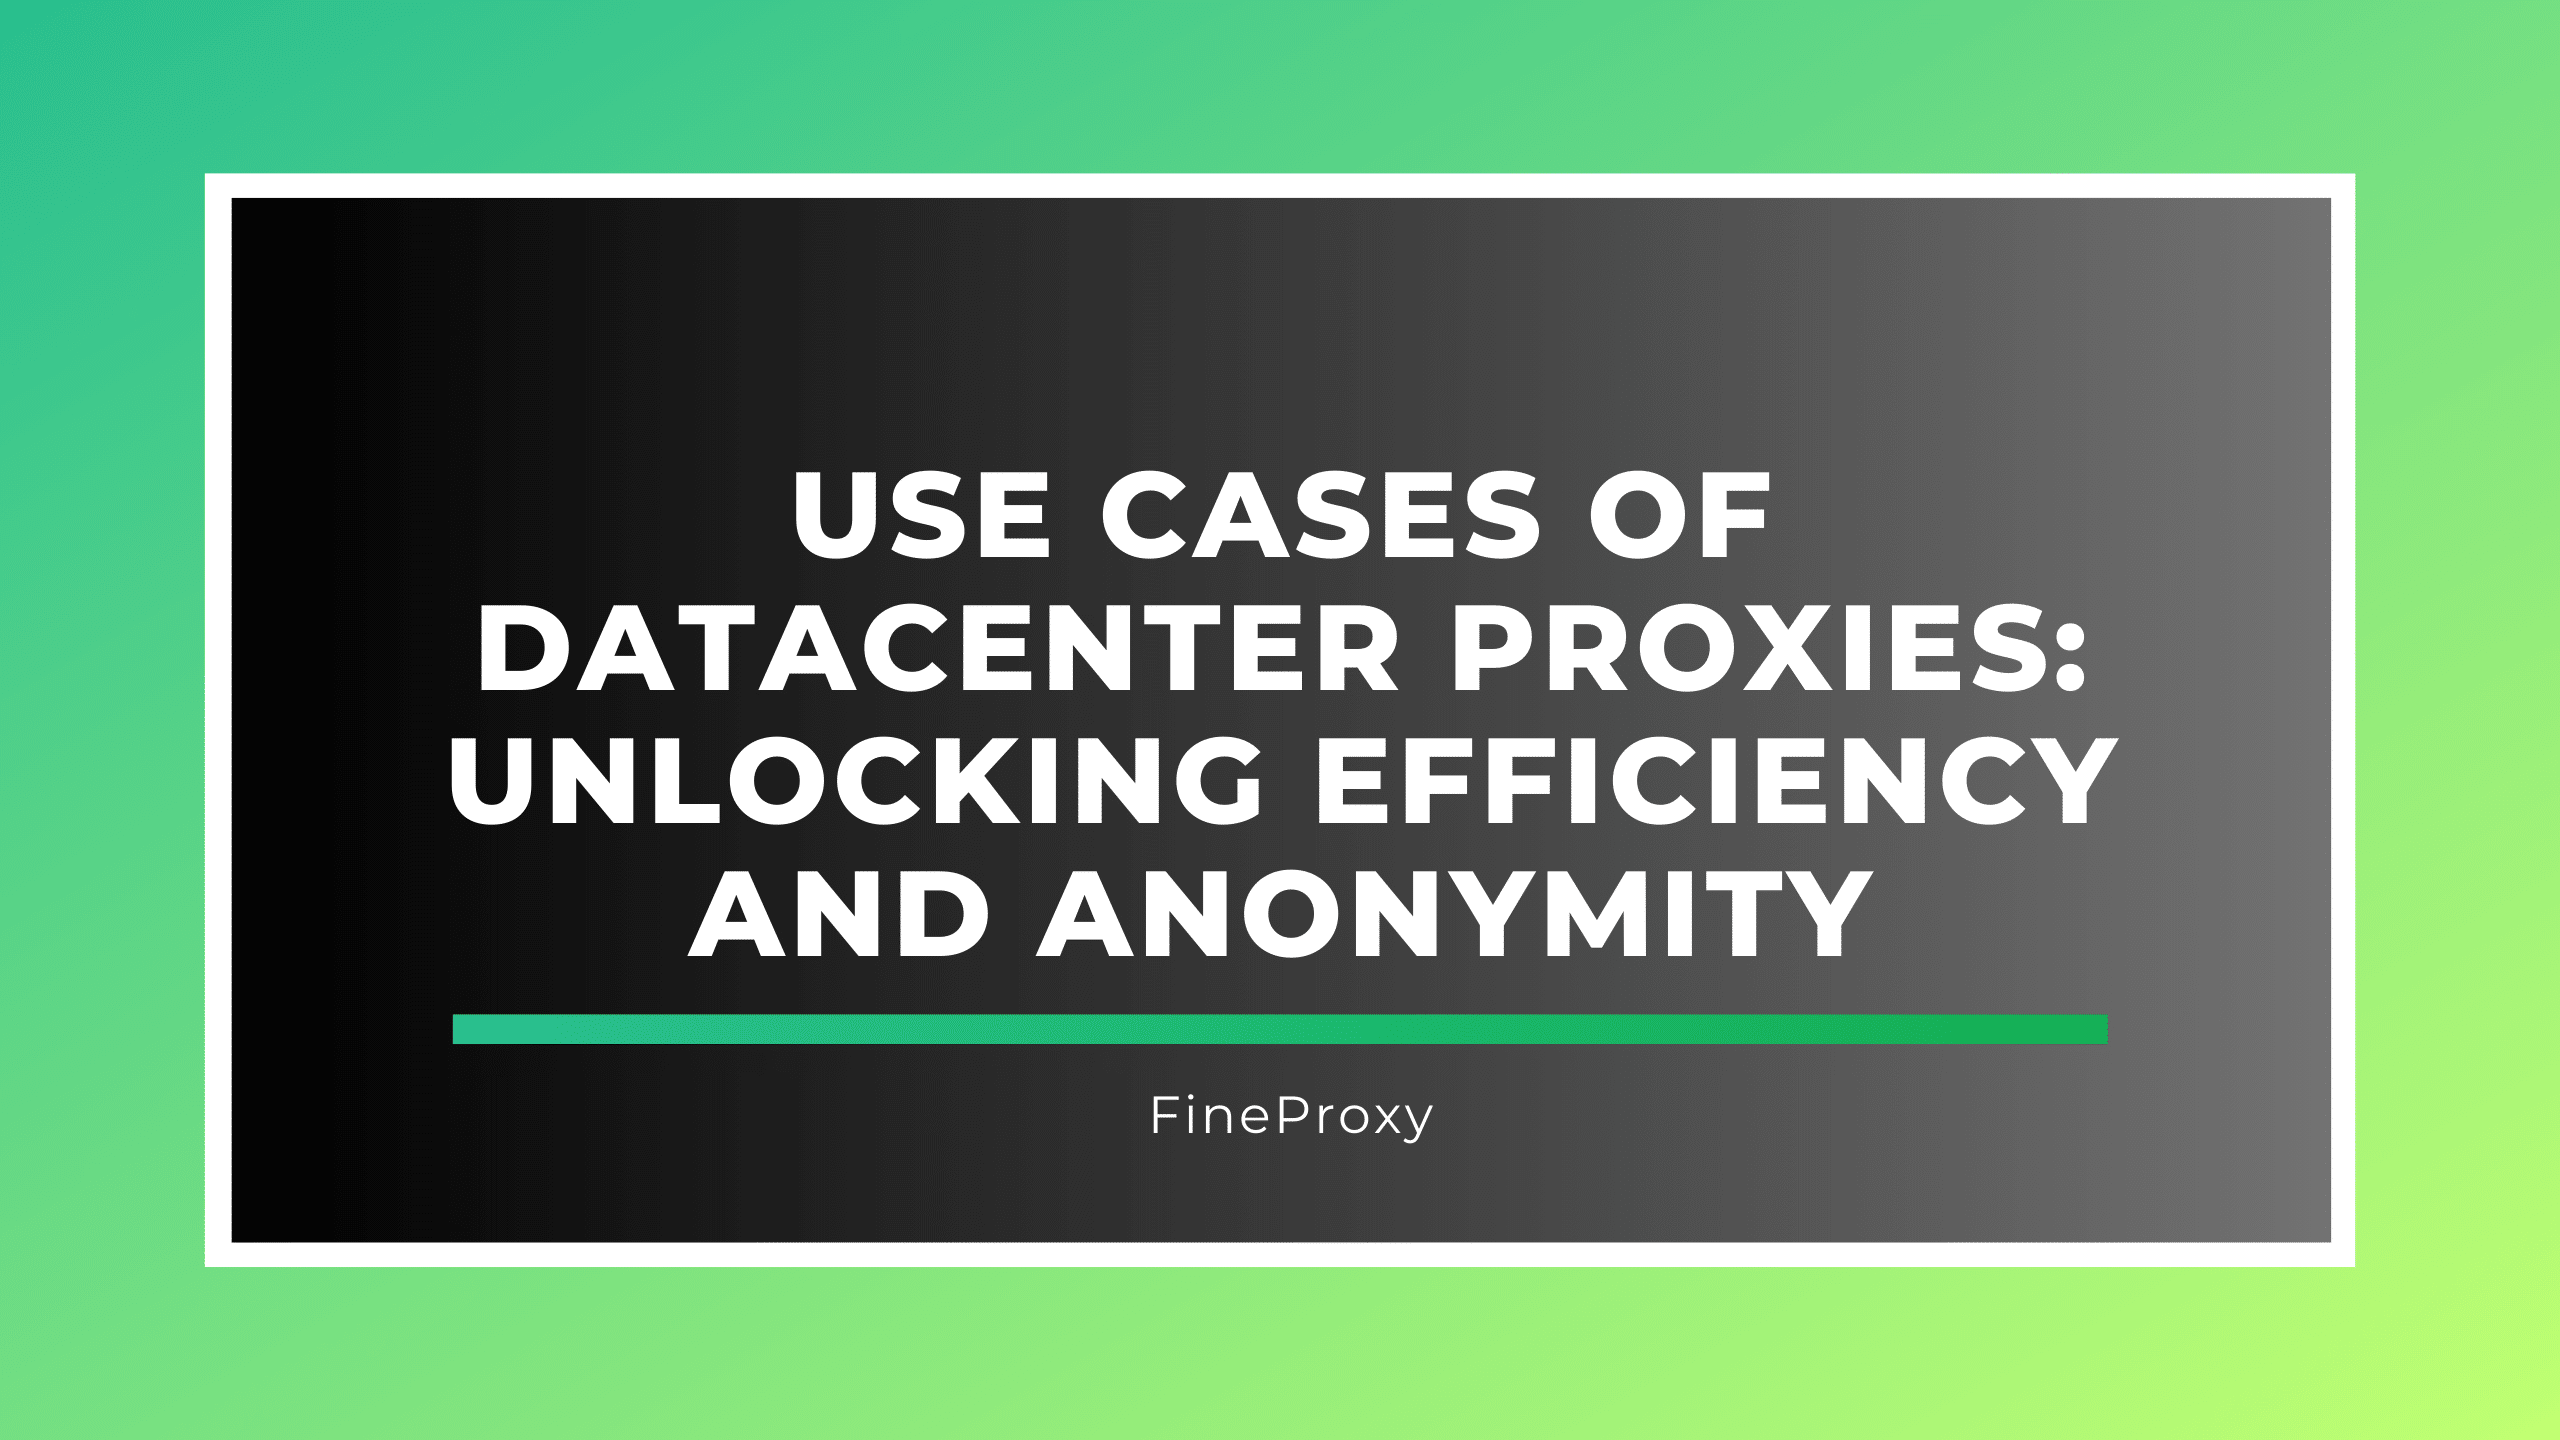 Use Cases of Datacenter Proxies: Unlocking Efficiency and Anonymity